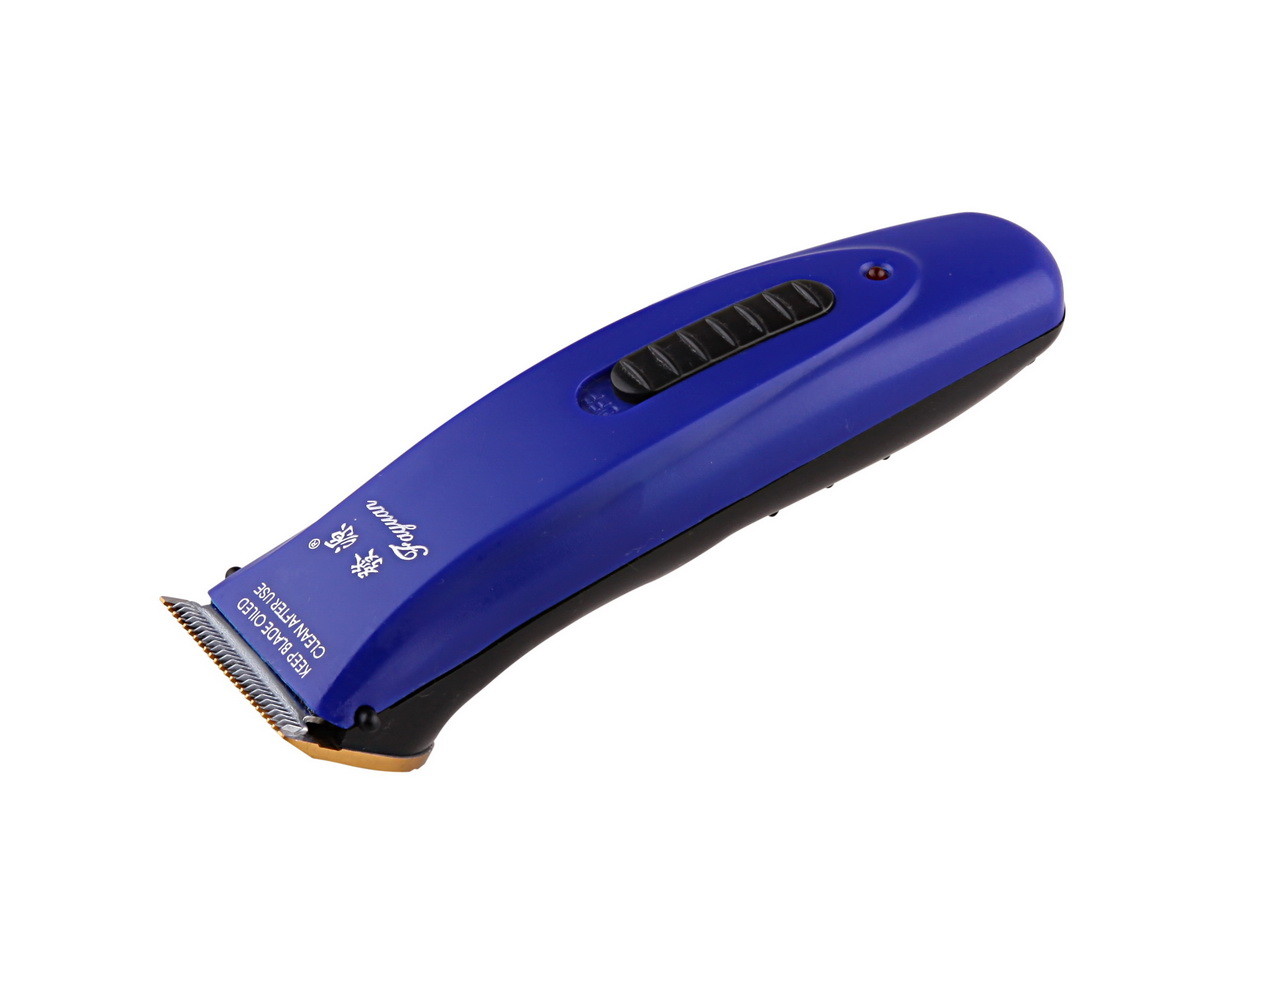 2 * 600mA Ni-Cd Battery Operated Hair Clippers With Charging Indicate Light